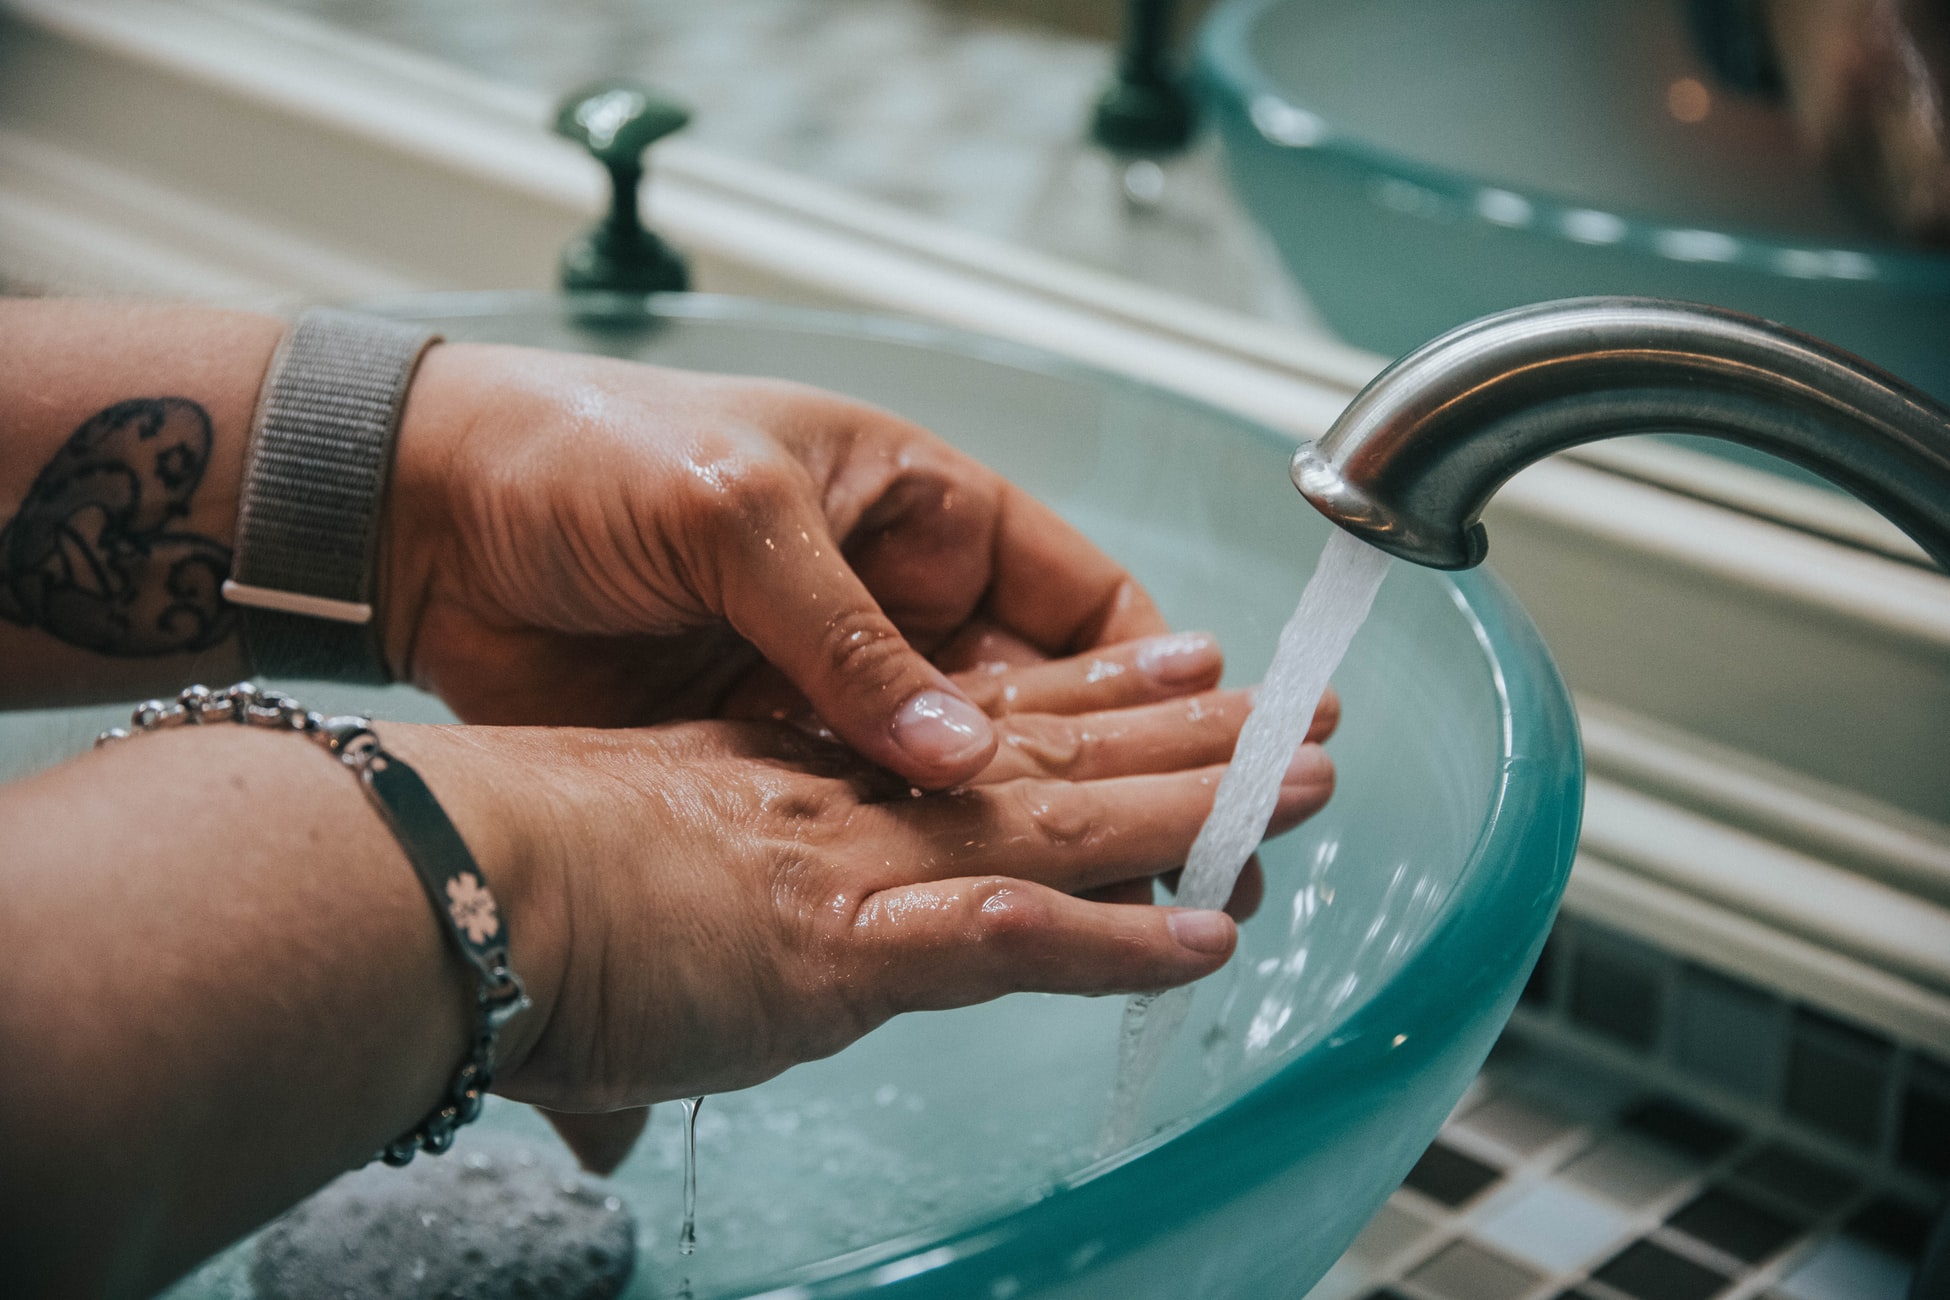 Why? Lathering and scrubbing hands creates friction, which helps lift dirt, grease, and microbes from skin.  Microbes are present on all surfaces of the hand, often in particularly high concentration under the nails, so the entire hand should be scrubbed.